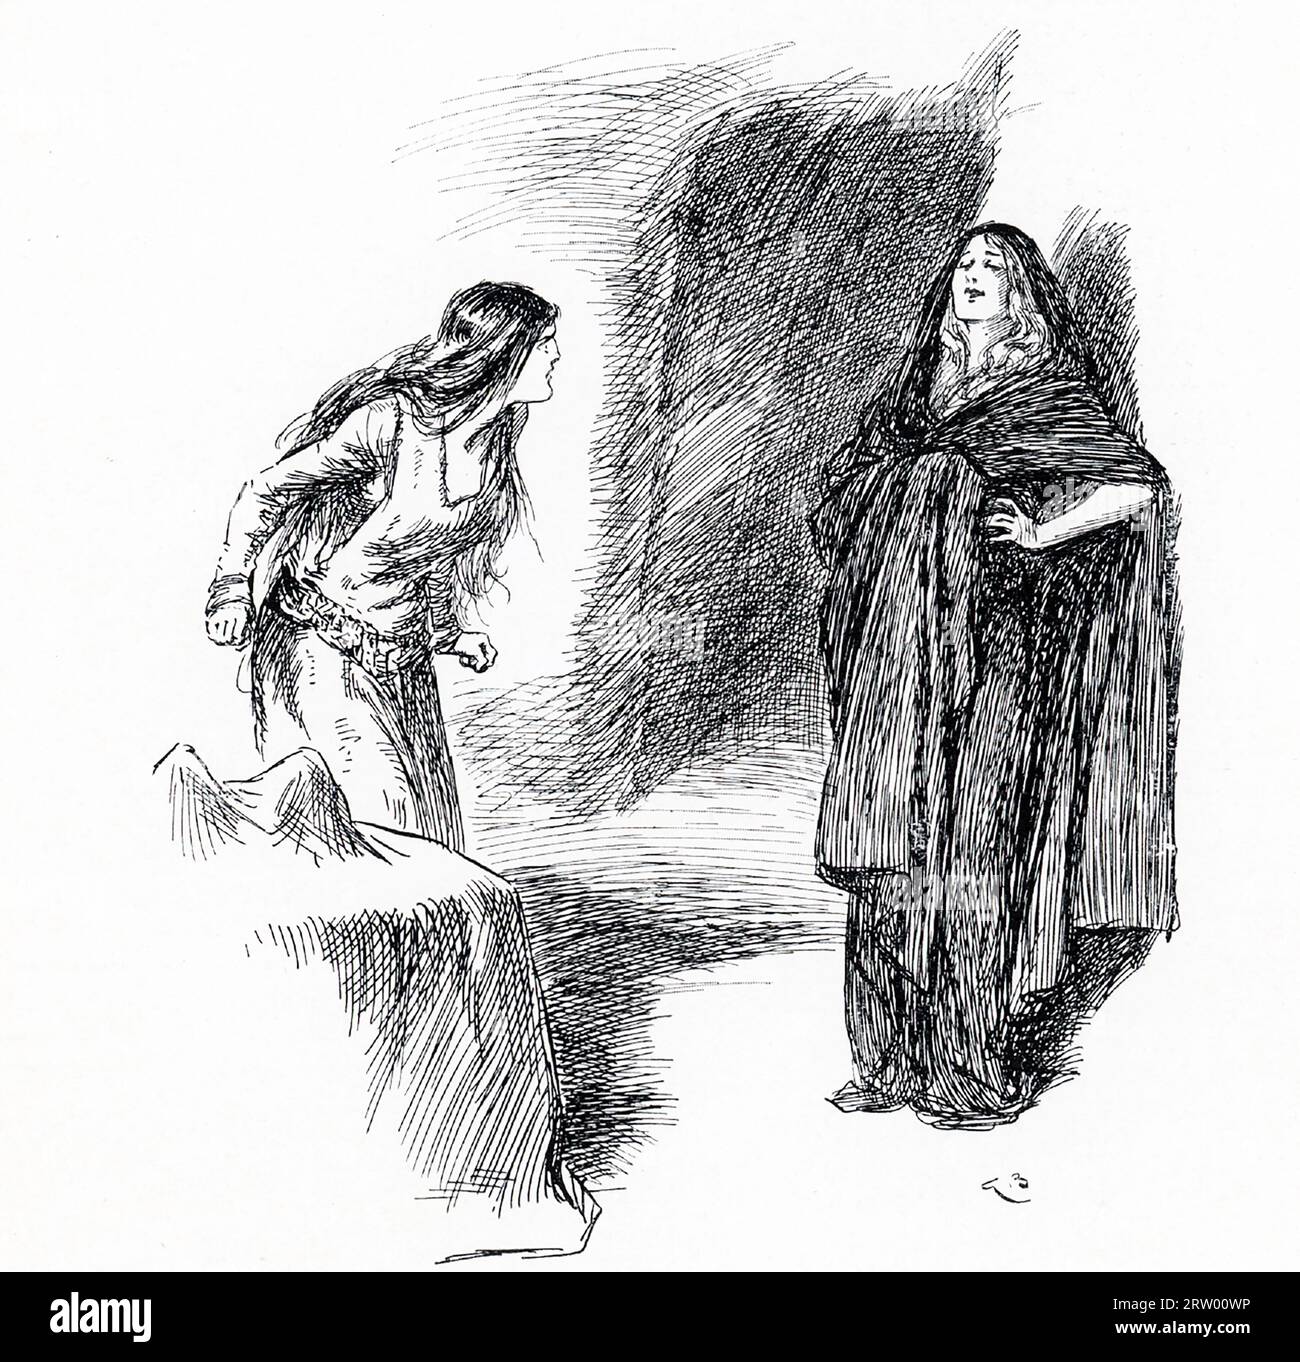 The early 1900s caption reads: "Gudrun rose and came towards Brynhild." In Norse mythology, Gudrun was the wife of the great hero Sigurd. n the Scandinavian ‘Volsunga Saga’, and the Icelandic ‘Poetic (or Younger) Edda’ and ‘Prose (or Elder) Edda’. The hero Sigurd came to King Giuki’s court after braving the wall of flames surrounding the warrior-maiden Brynhild, with whom he fell in love. In the course of an argument between Gudrun and Brynhild, Brynhild realized she had been wedded to Gunnar by deception, and in her rage sought Sigurd’s death. Stock Photo